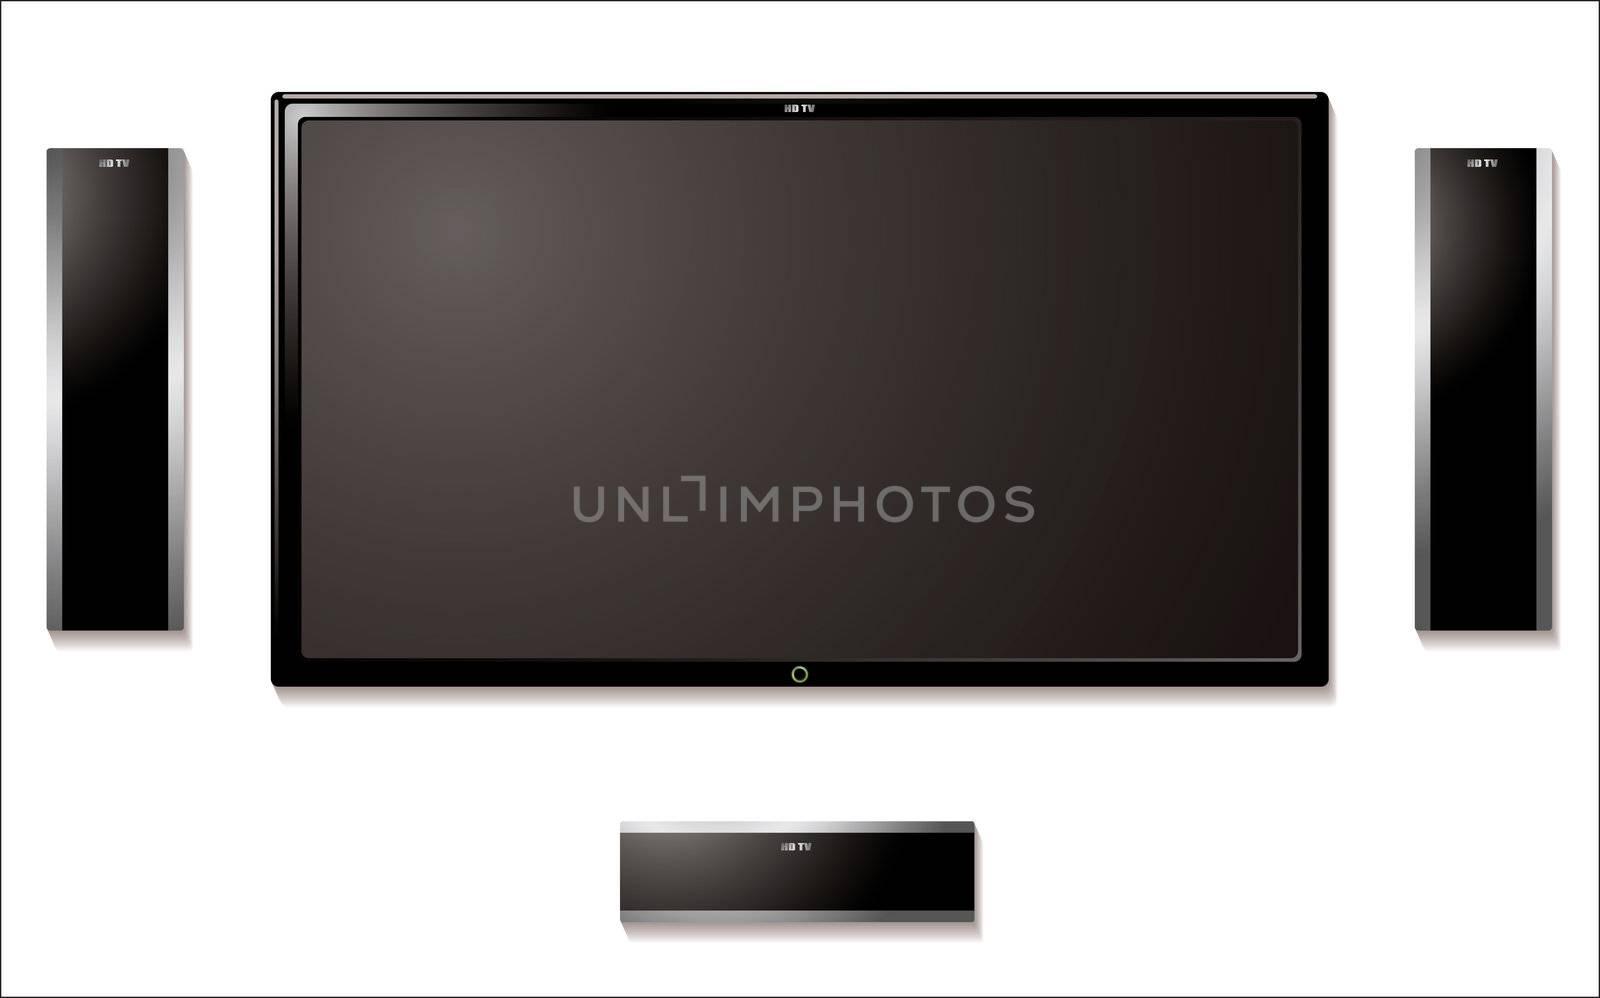 Modern flat screen tft television with surround sound speakers